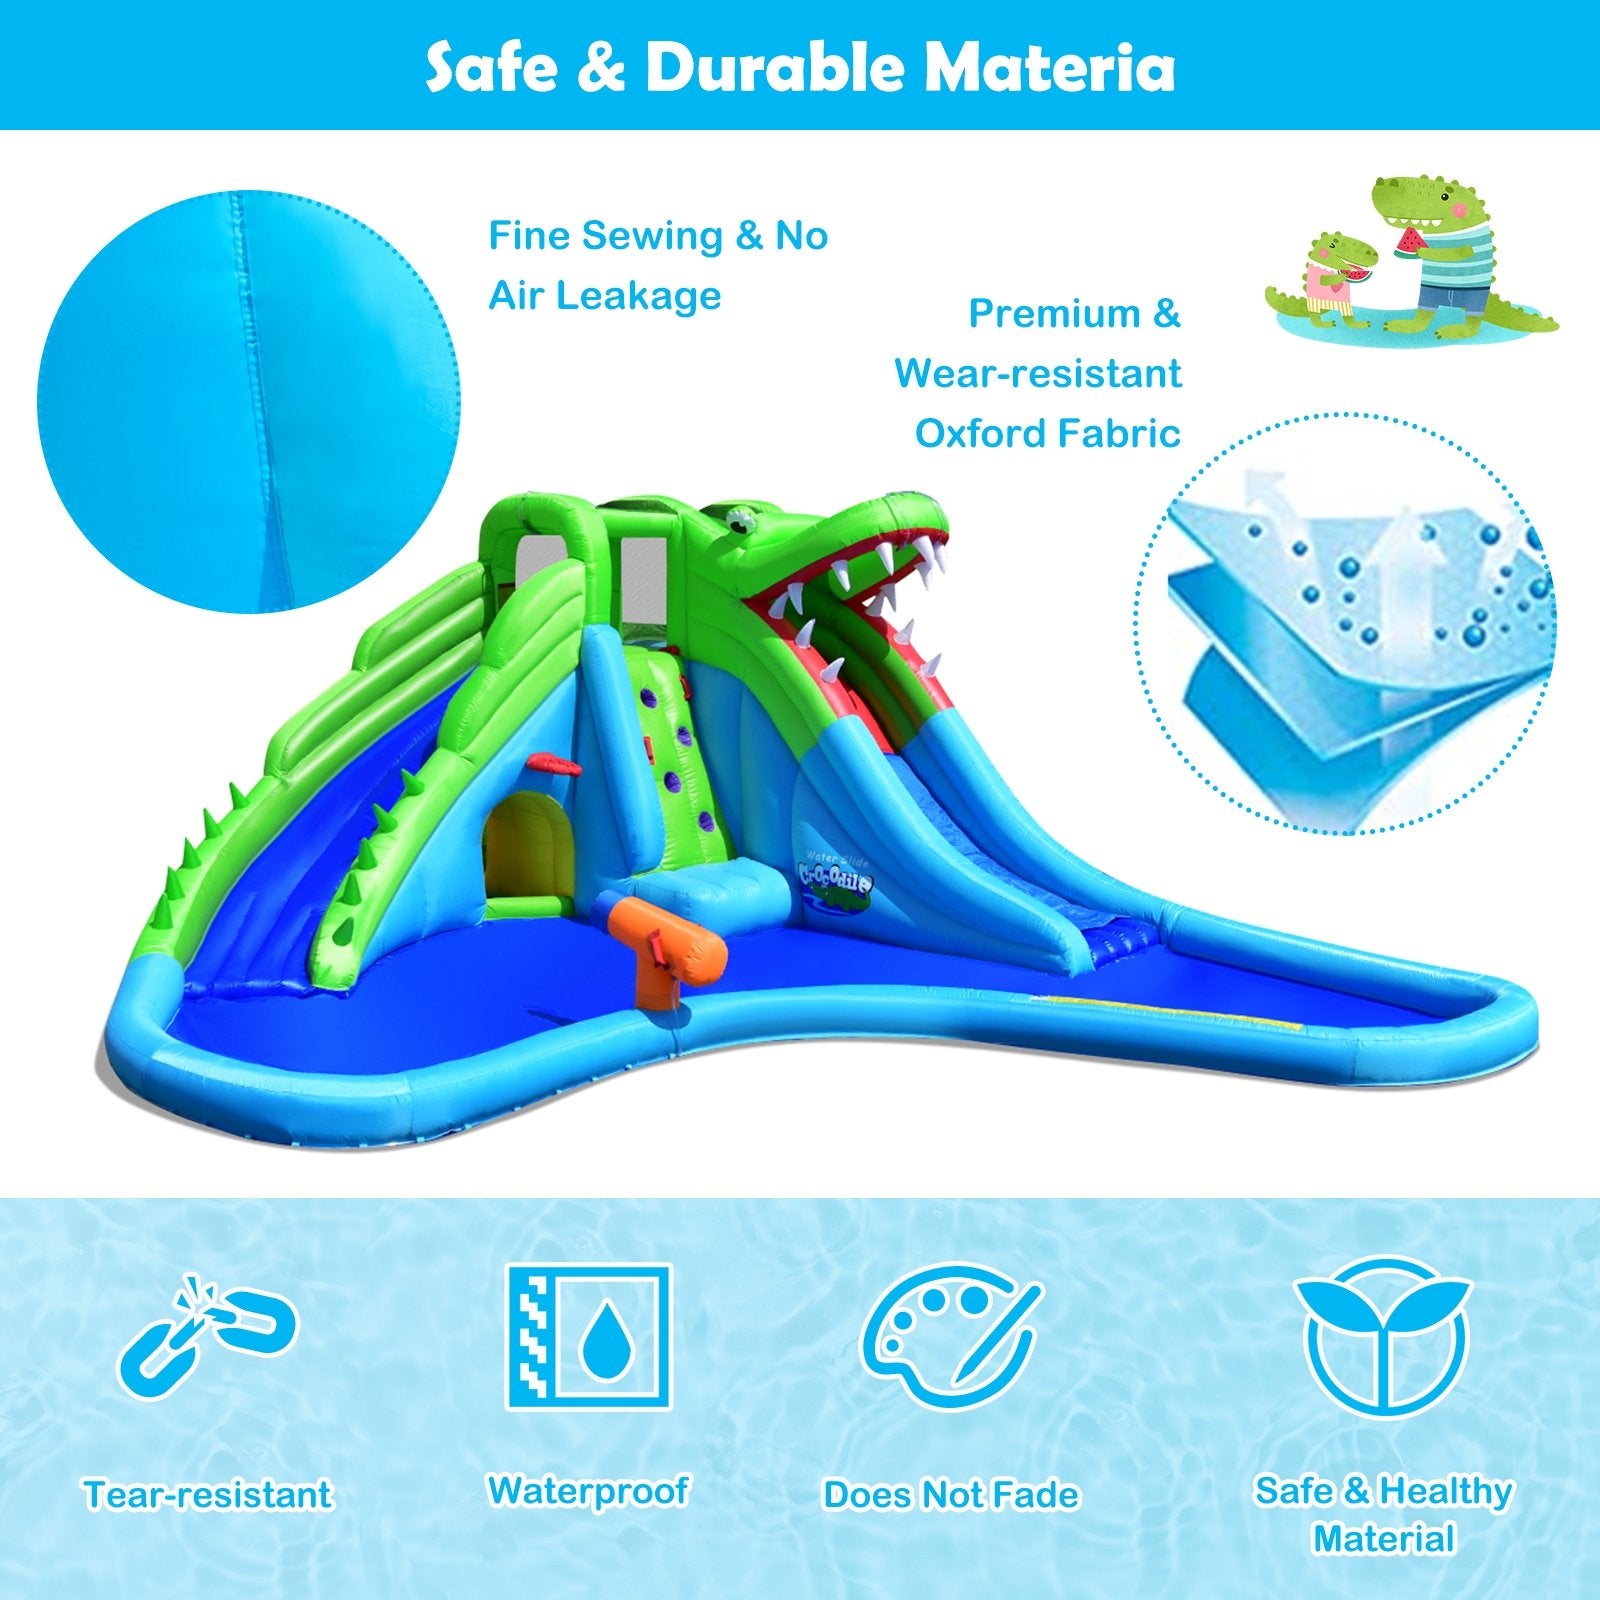 Inflatable Crocodile Water Slide Climbing Wall Bounce House at Gallery Canada